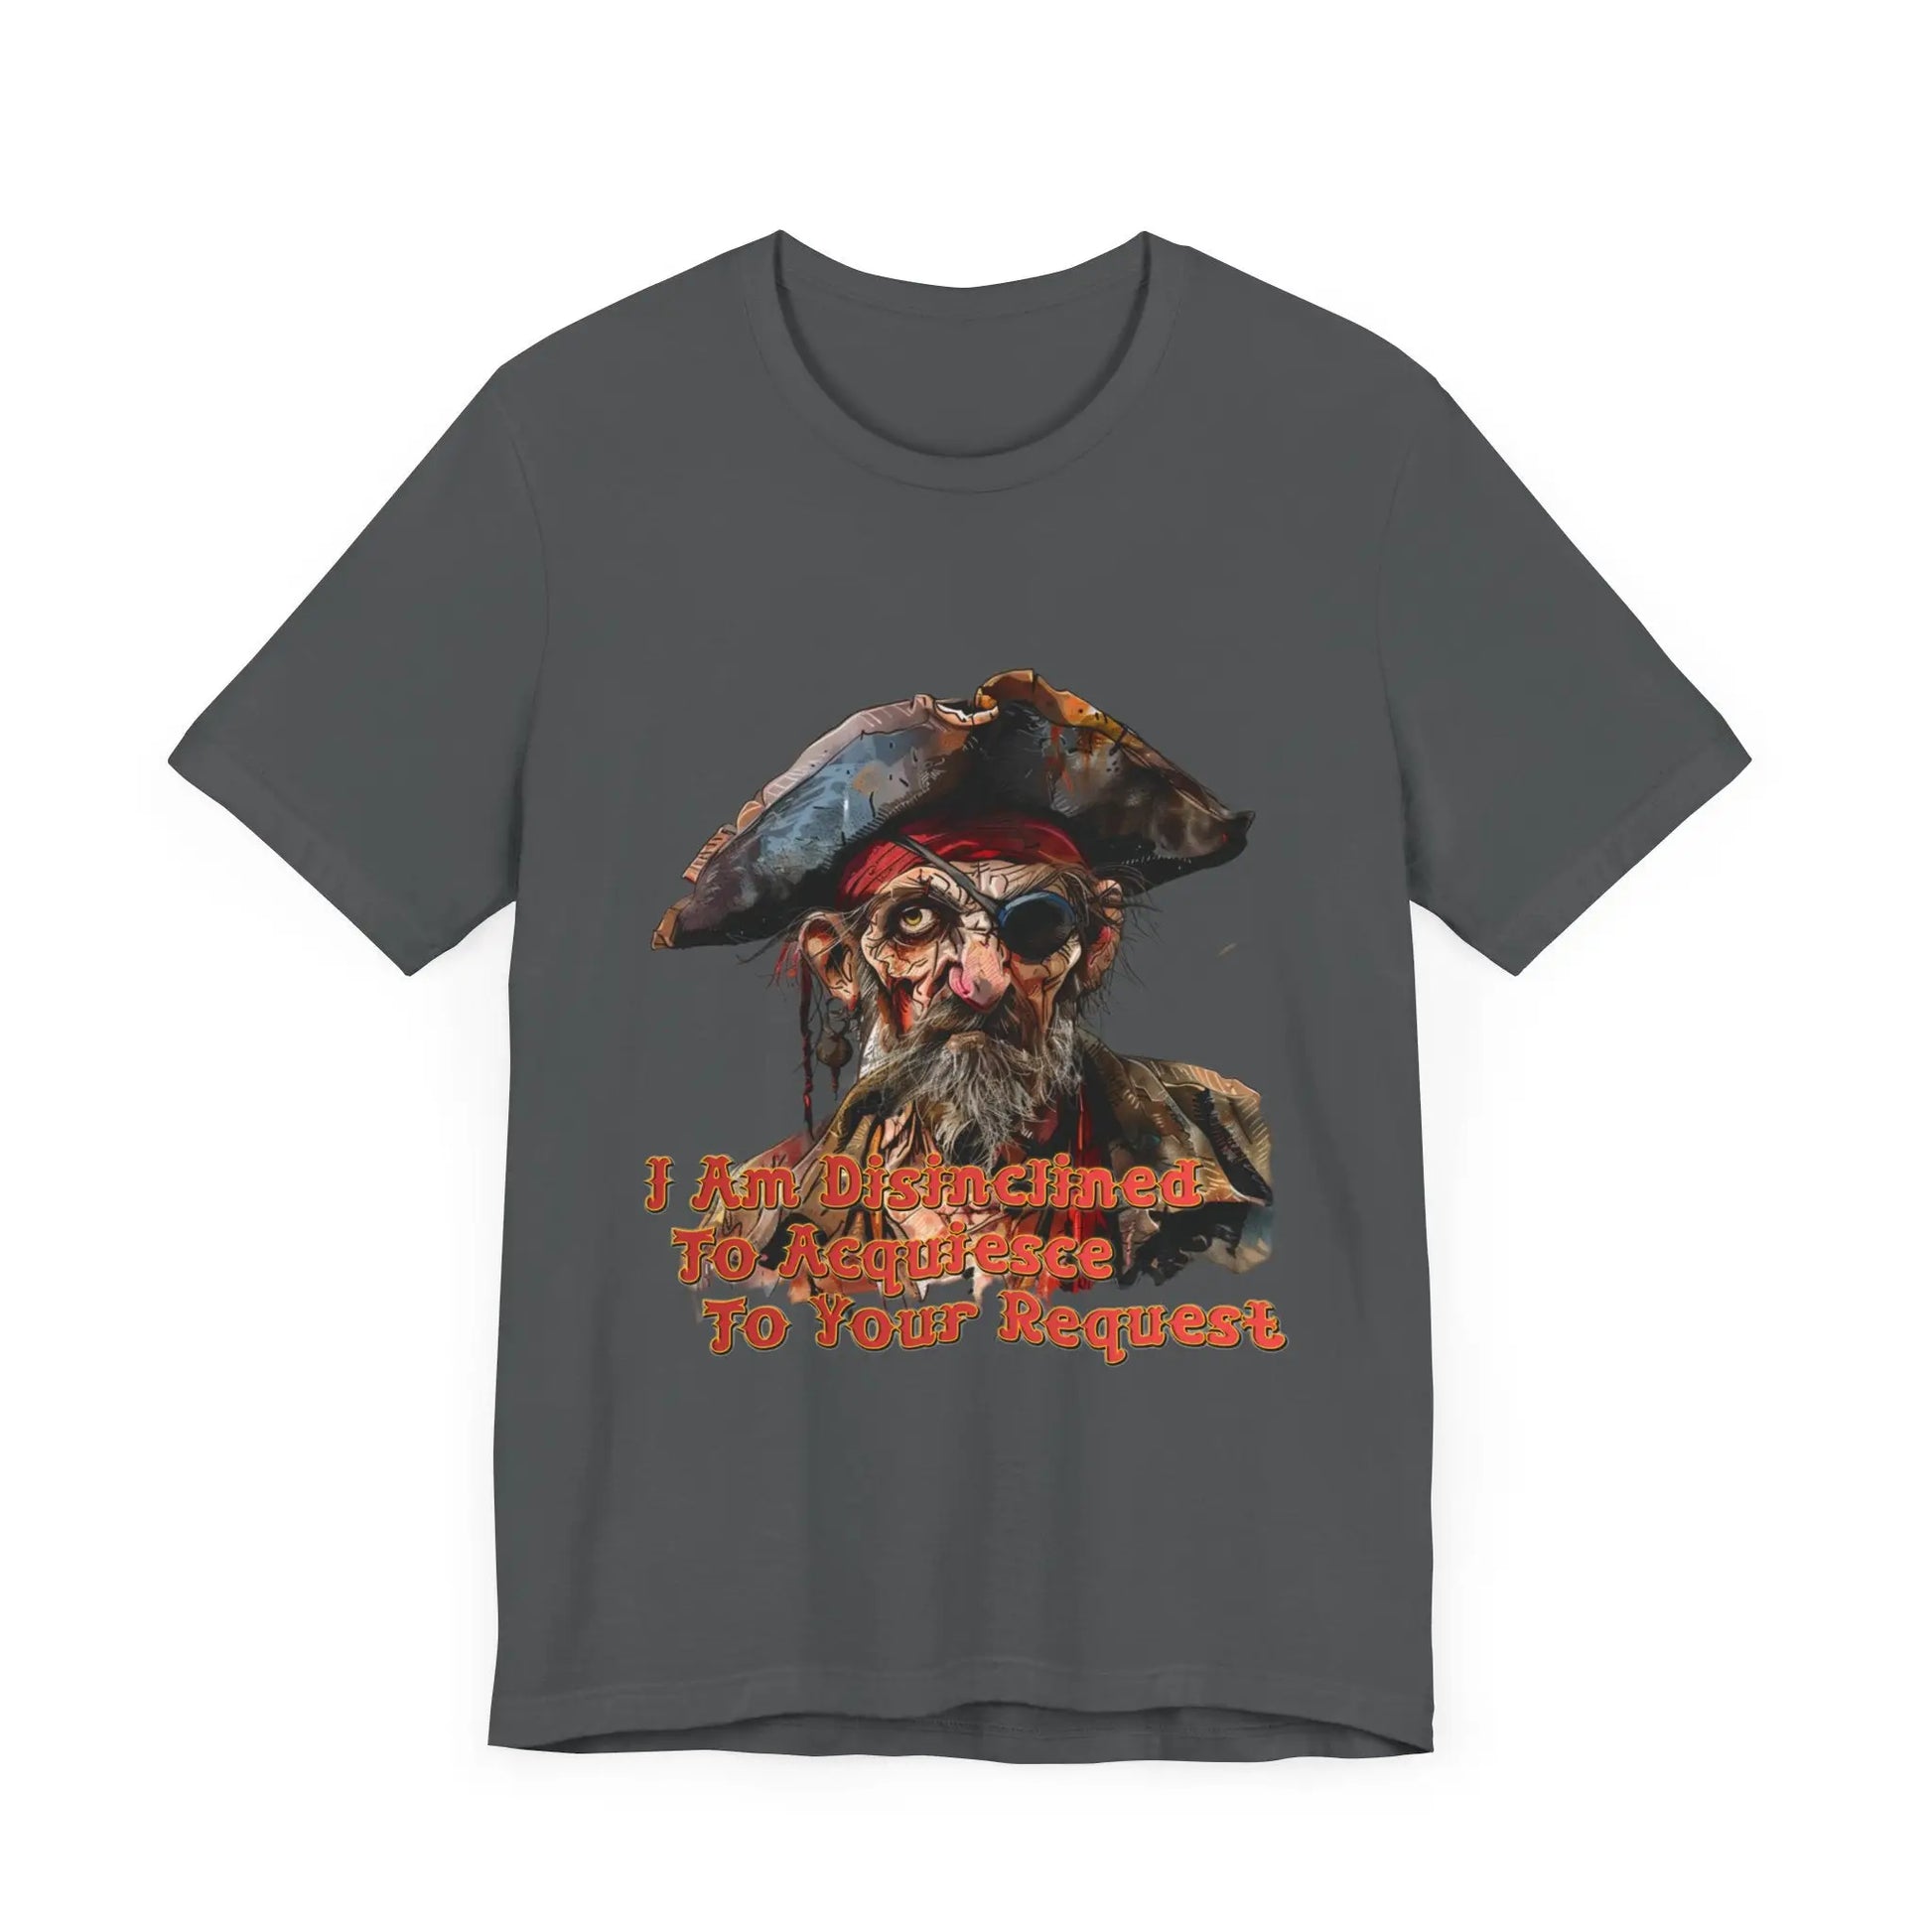 Disinclined to Acquiesce Men's Tee - Wicked Tees